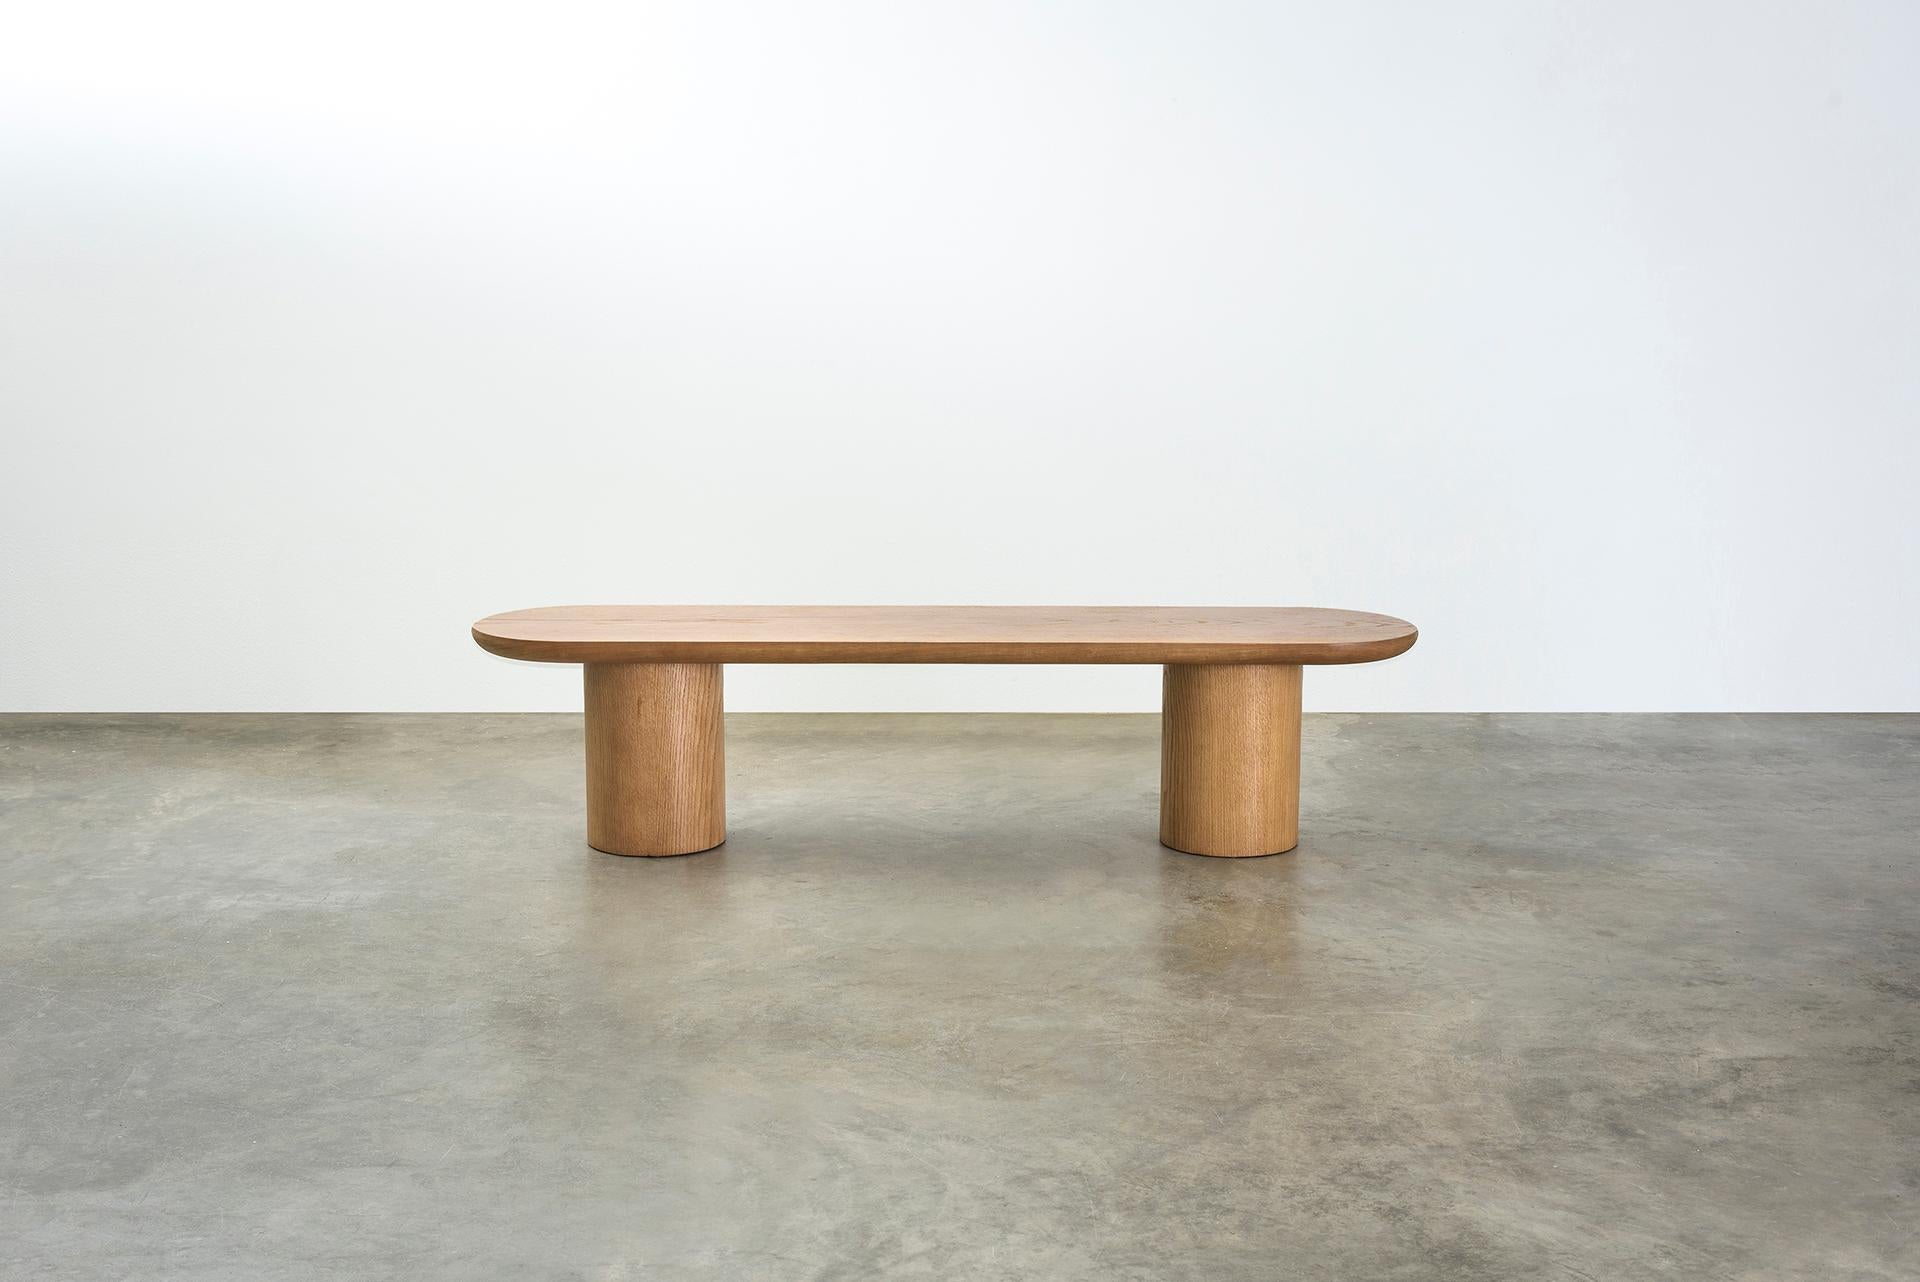 Porto low tables are composed of a circular top that seems to rest on a sturdy oblong base. Lightness and weight overlap creating a harmonic and unconventional monoblock.
The unagreement between the geometry of the elements generates irregular